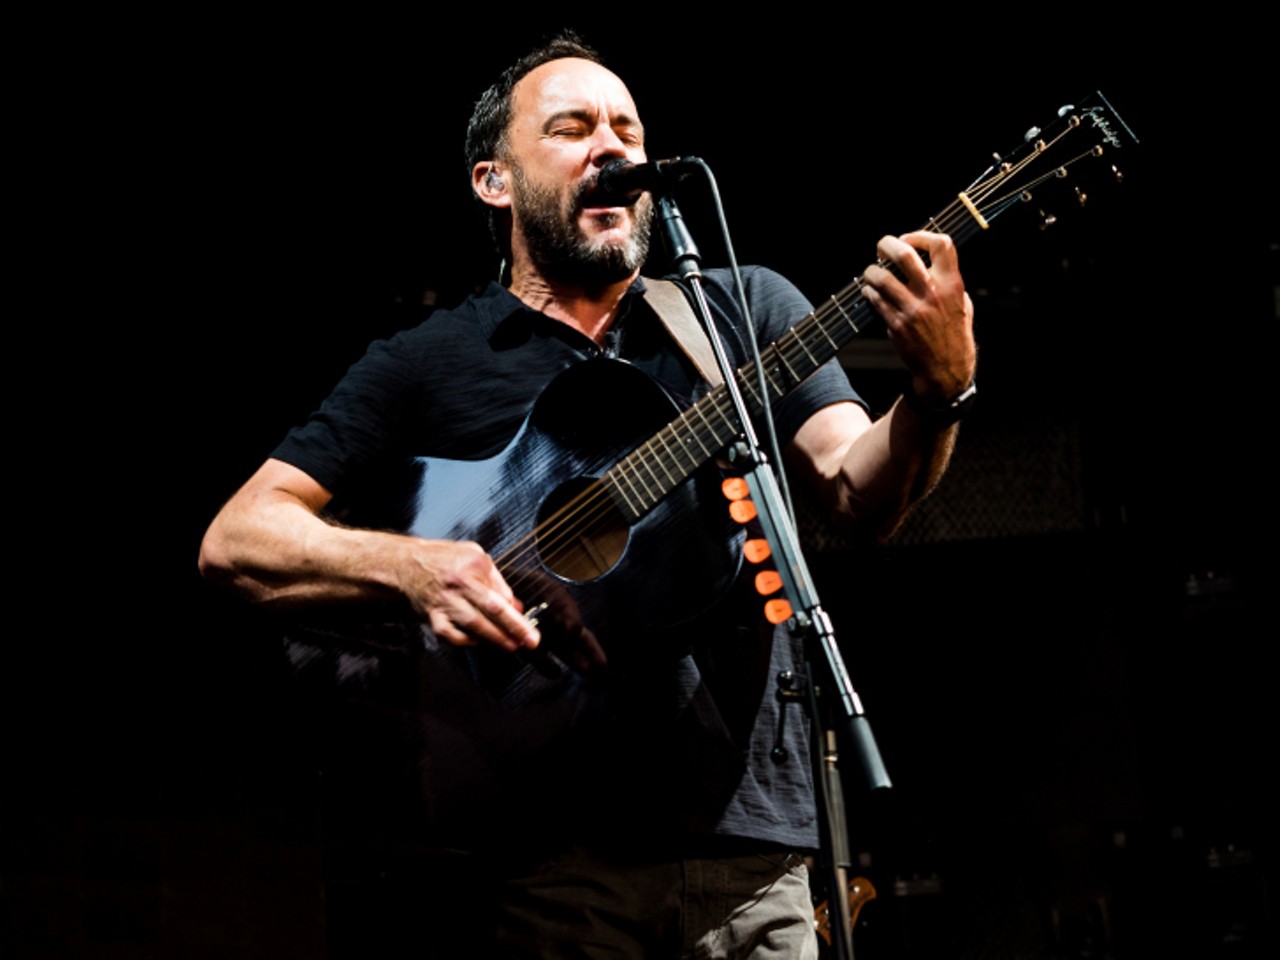 Everything we saw at the Dave Matthews Band show at DTE Energy Music Theatre